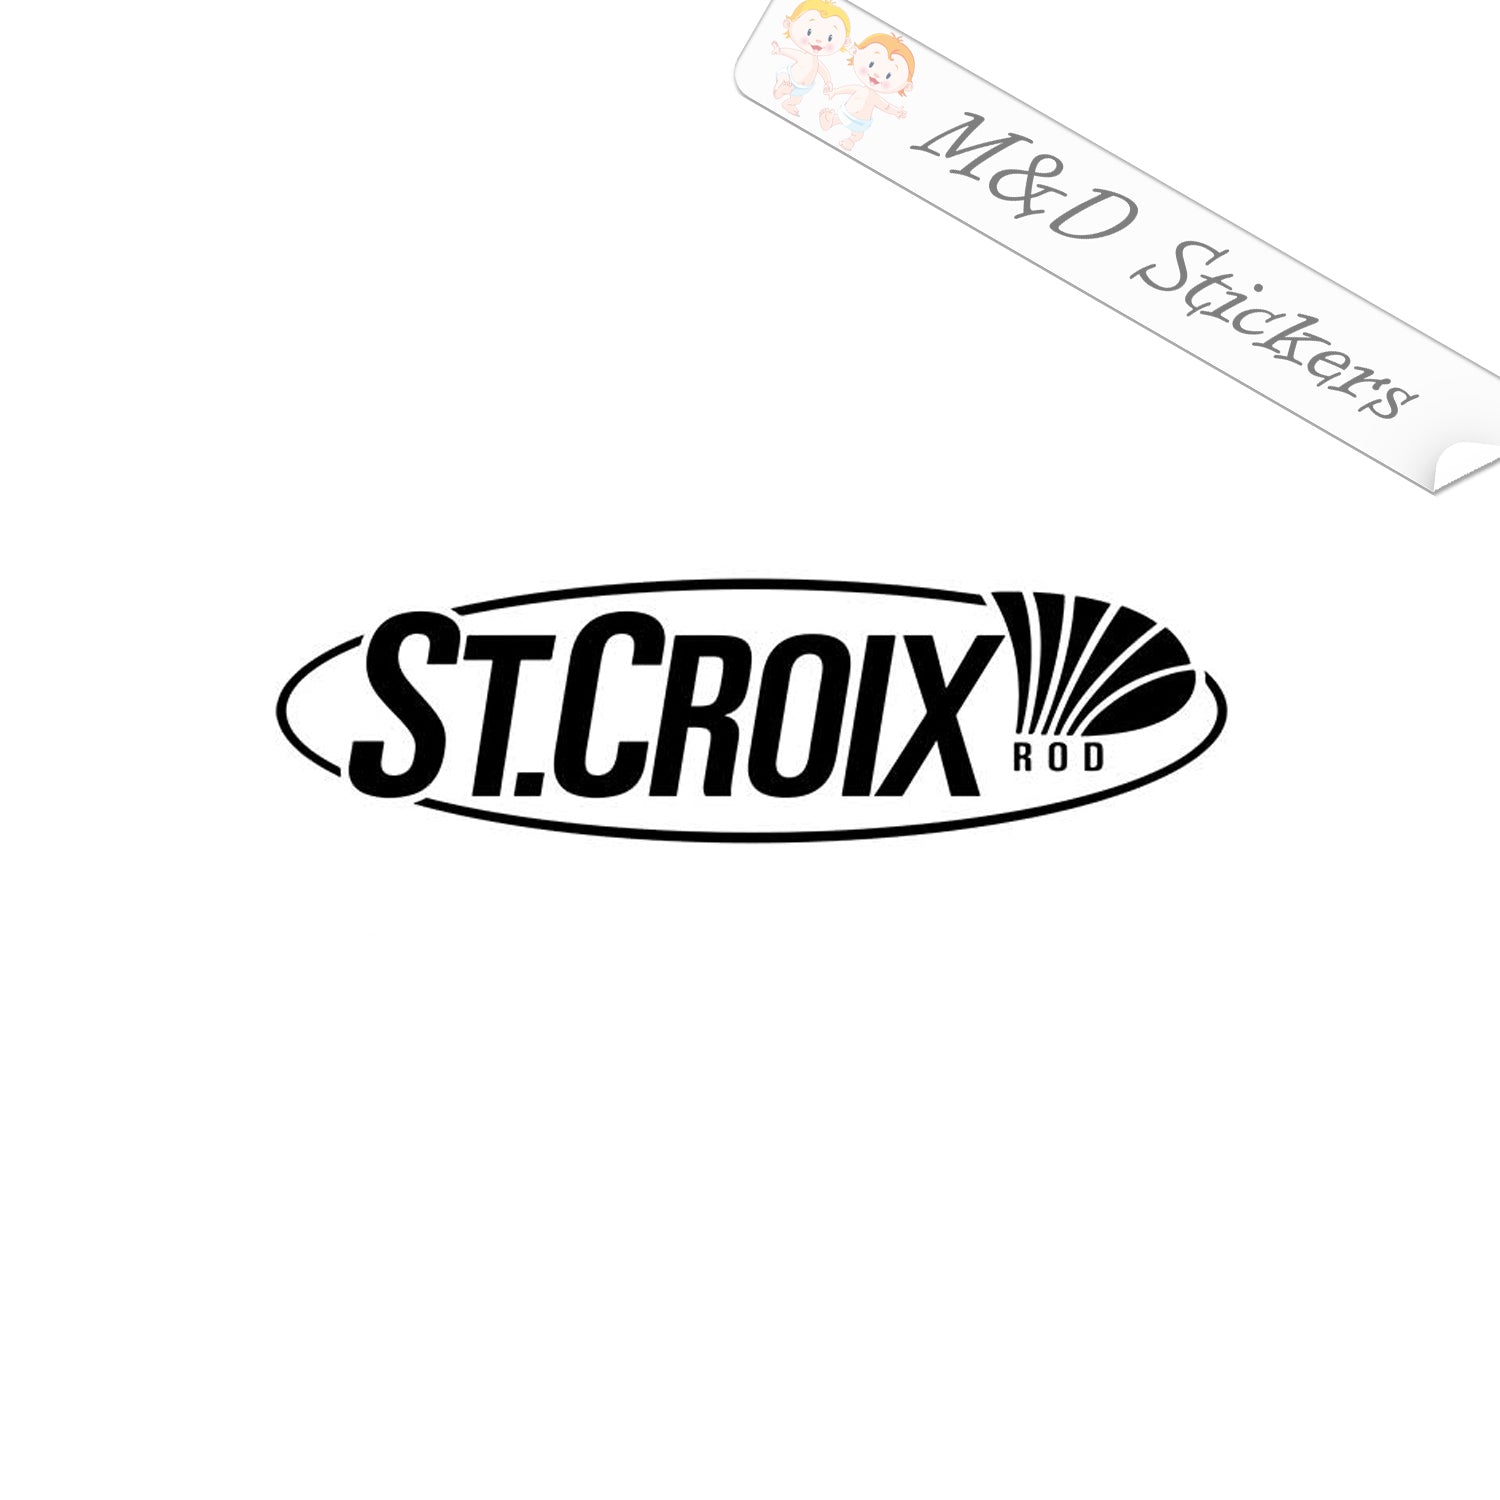 2x St Croix Fishing Rods Vinyl Decal Sticker Different colors & size f –  M&D Stickers